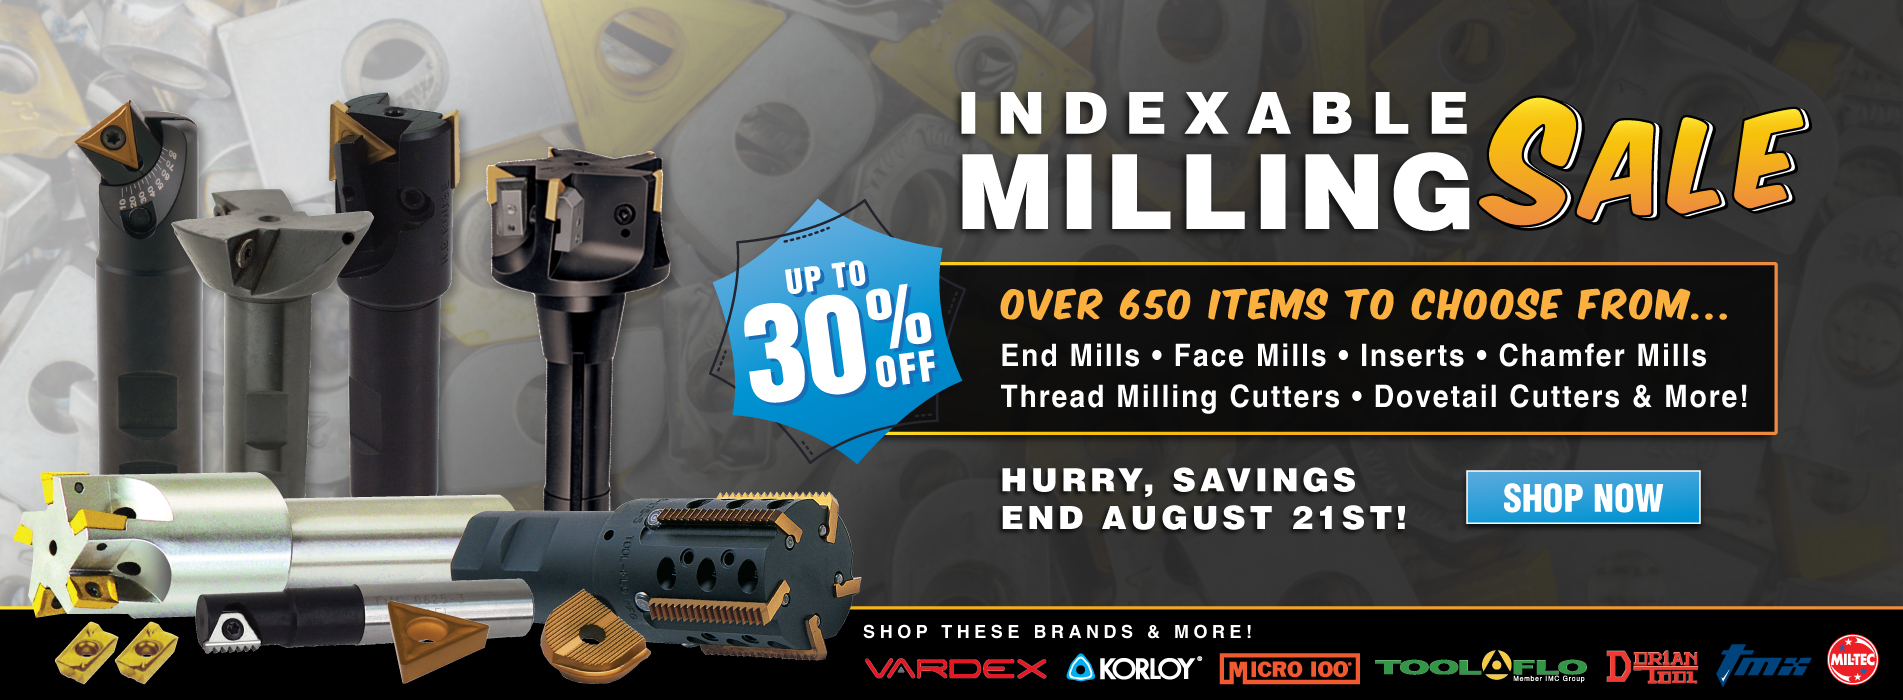 Indexable Milling Sale! Save Up To 30%! Choose from over 650 items! 